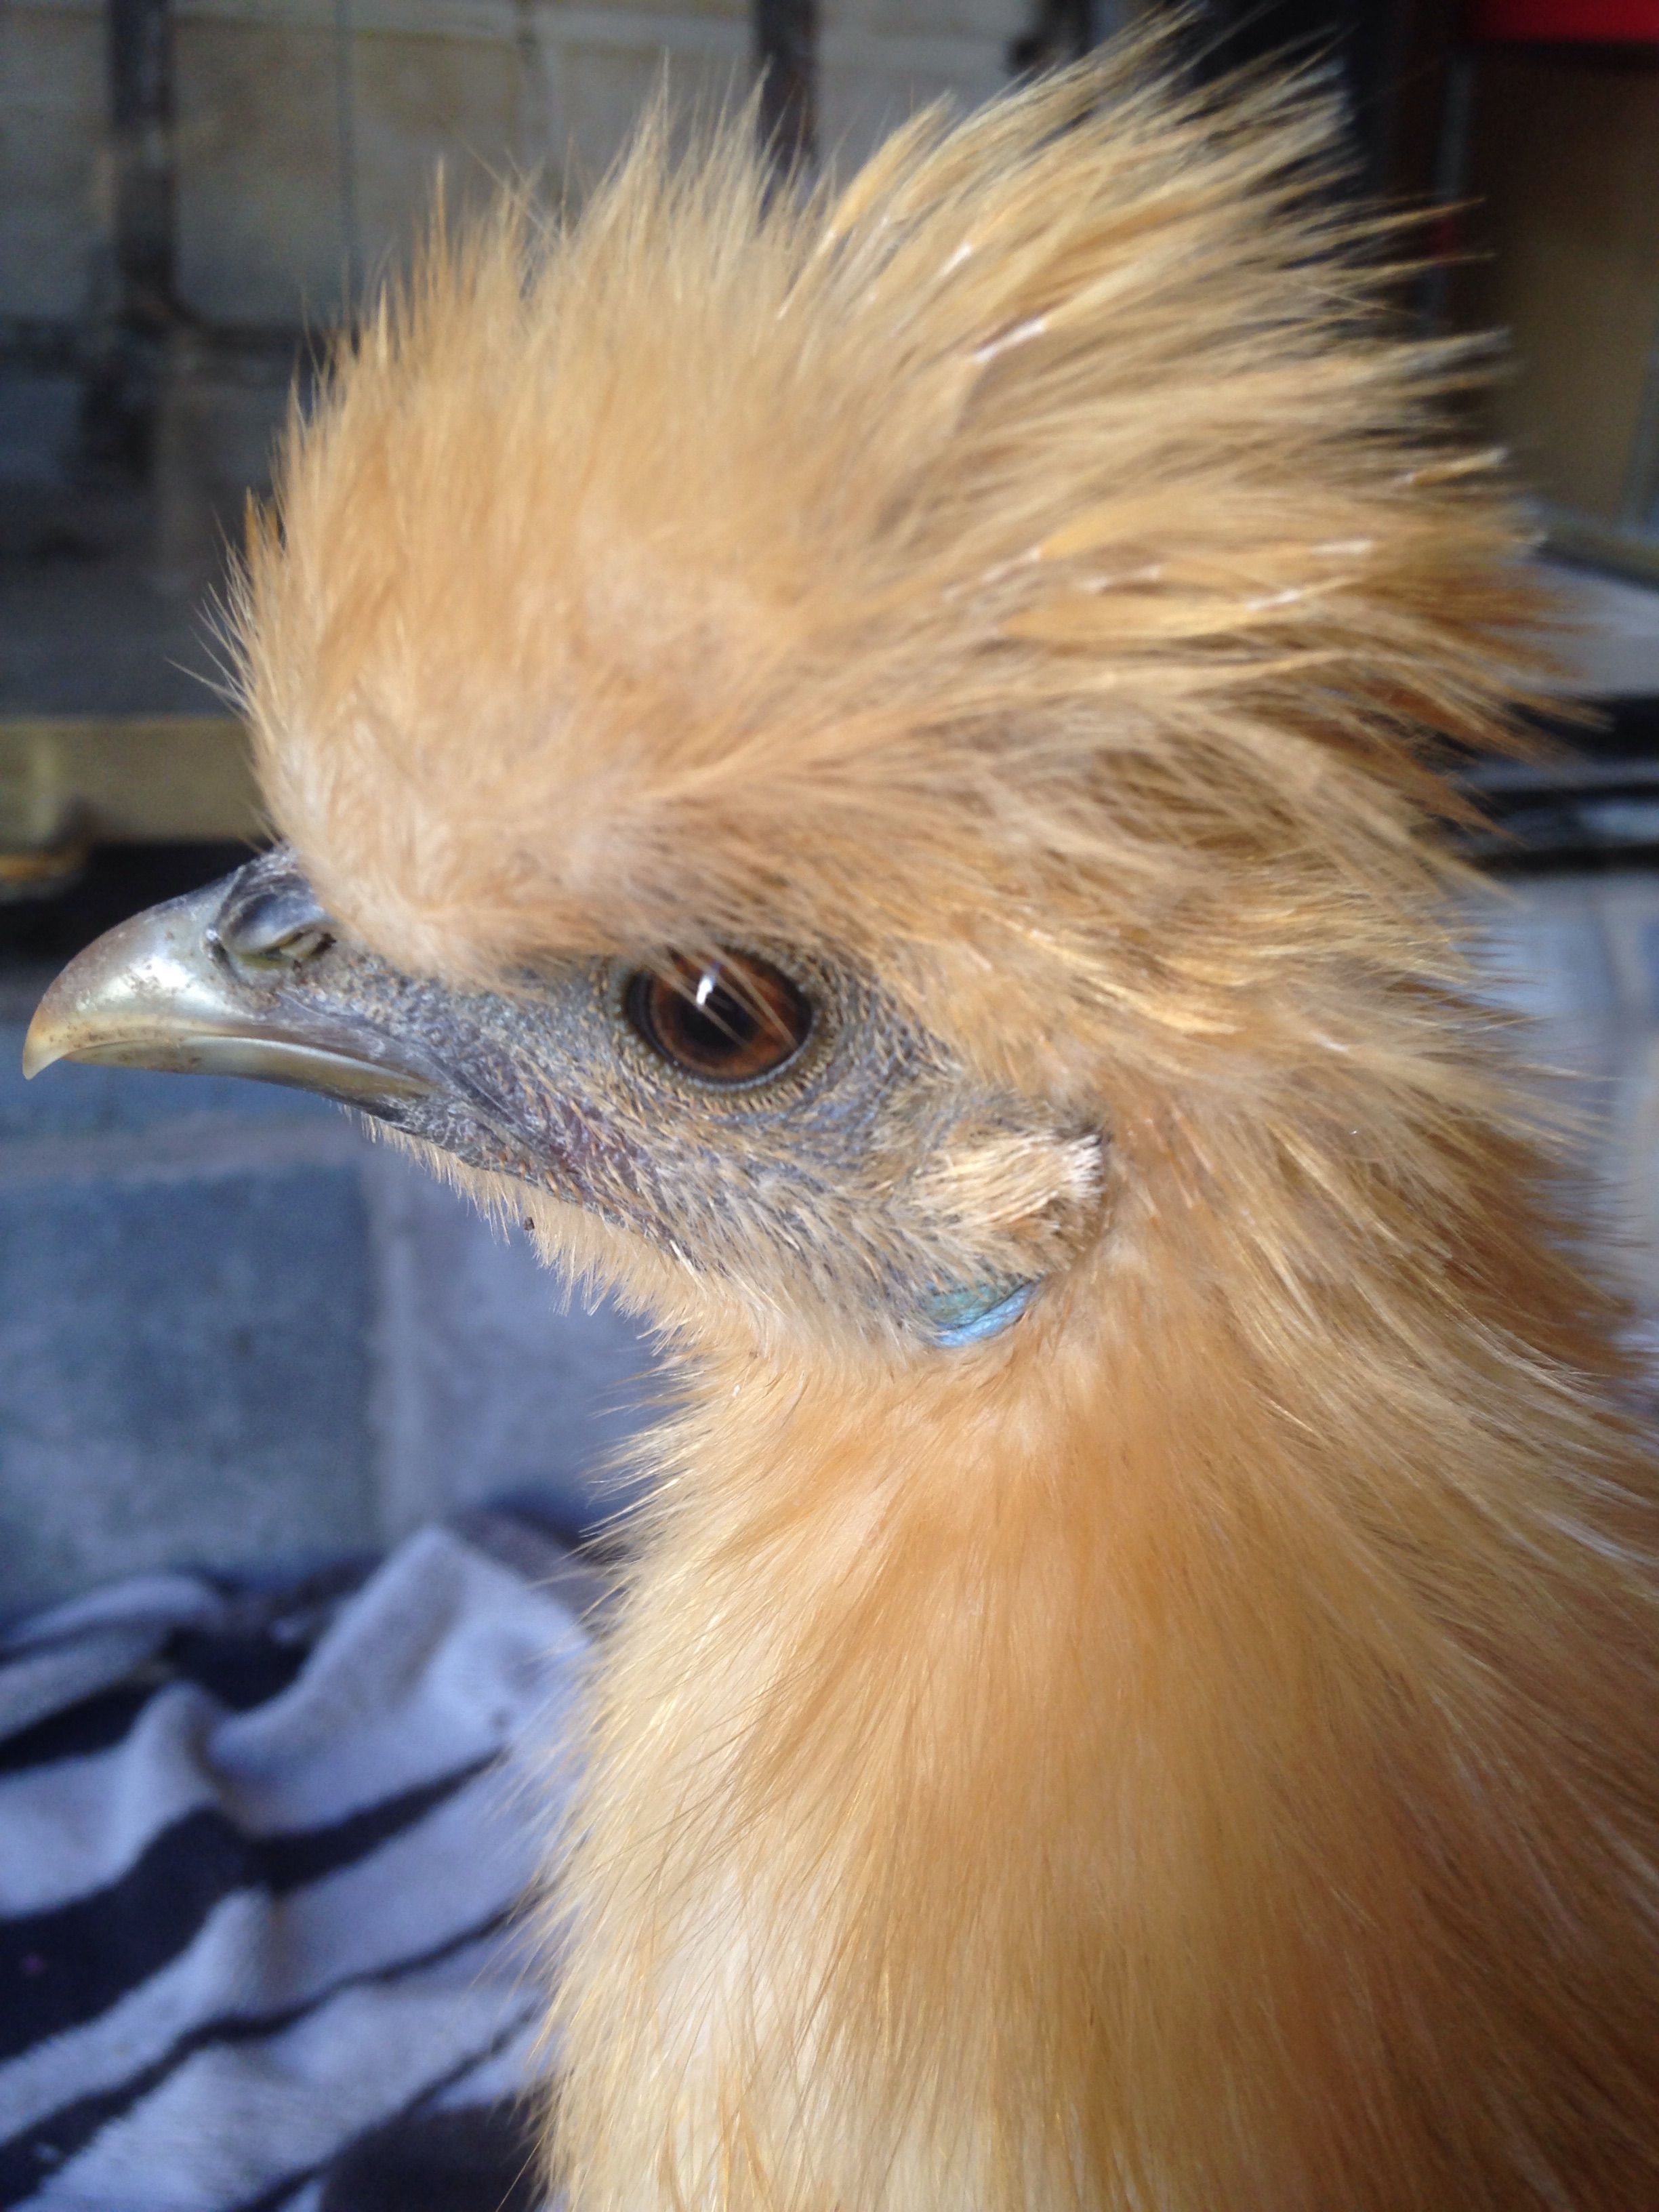 Mary poppins our silkie!